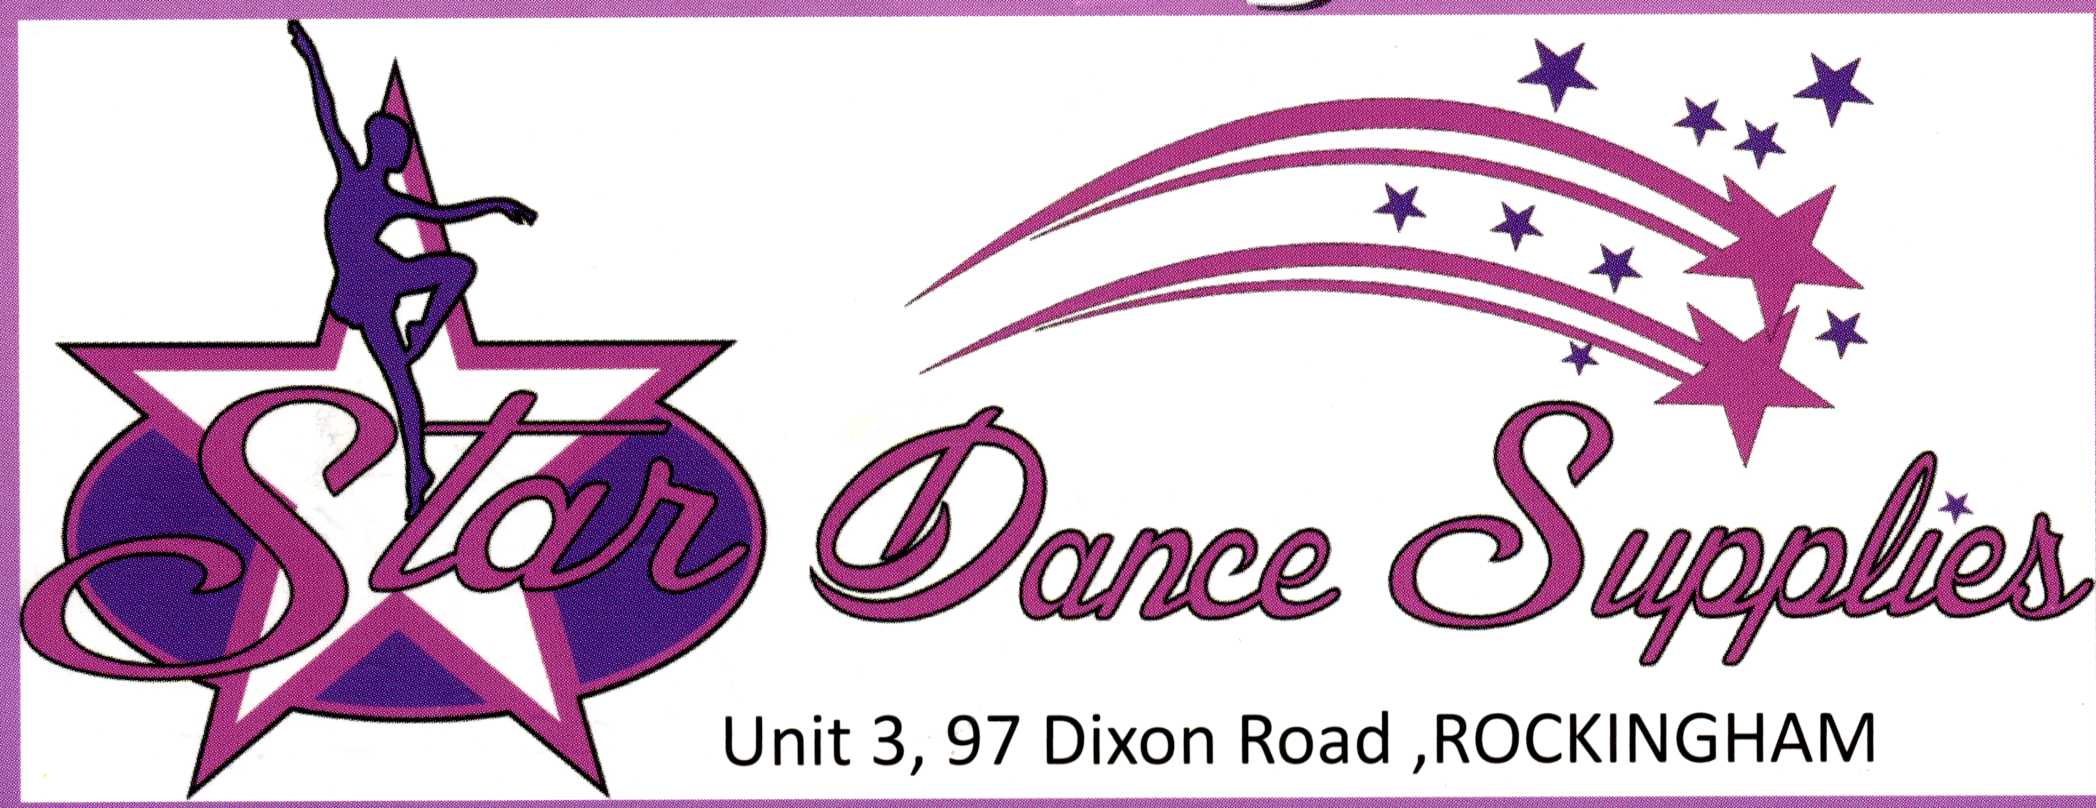 STAR DANCE SUPPLIES ⭐ AFFORDABLE DANCE SUPPLIES AND ACCESSORIES - CHEERLEADING COSTUMES